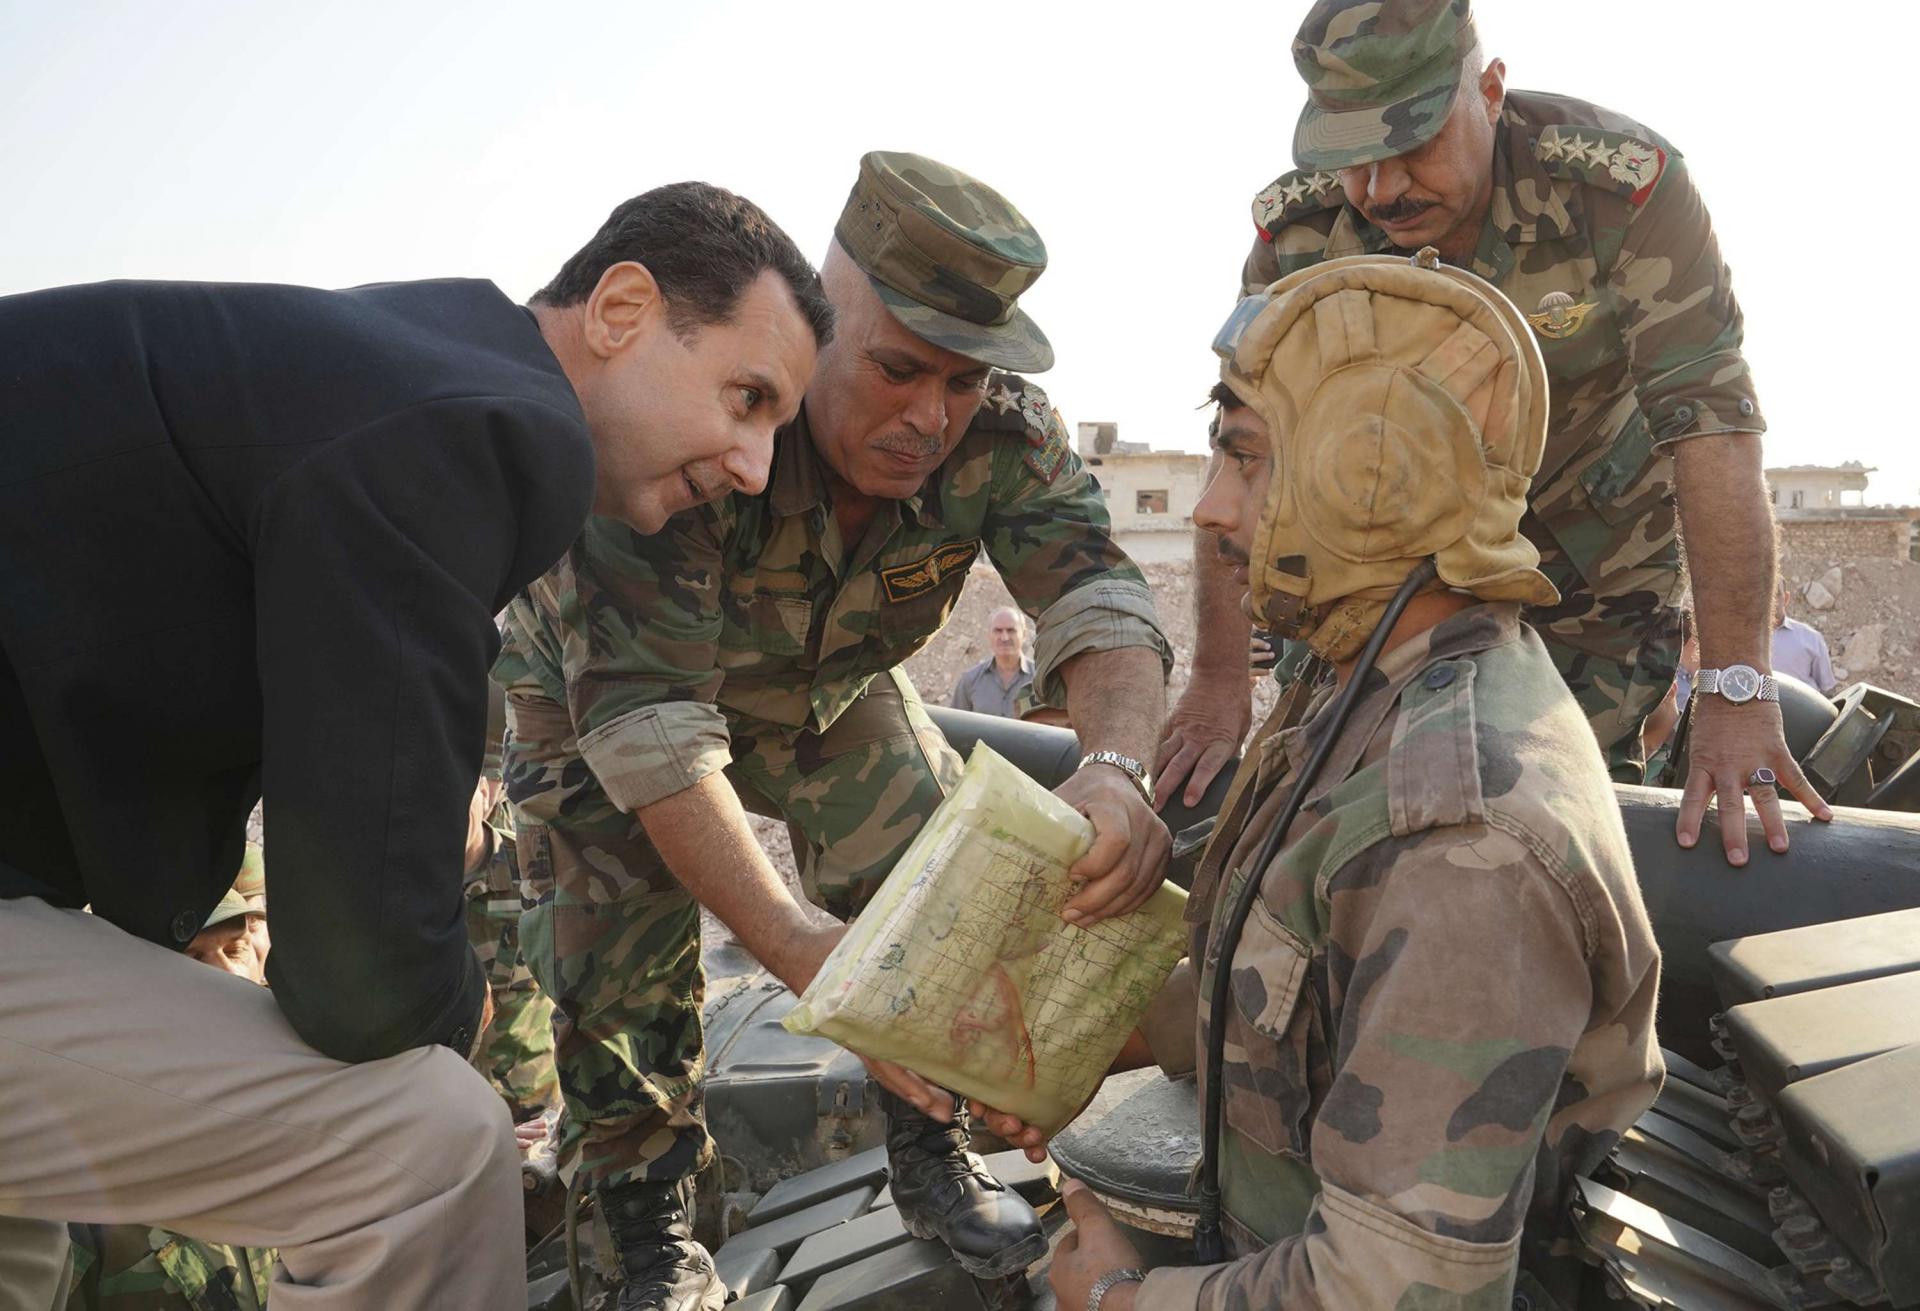 After turning the tide of the war, Assad's forces now control around 60 per cent of the country